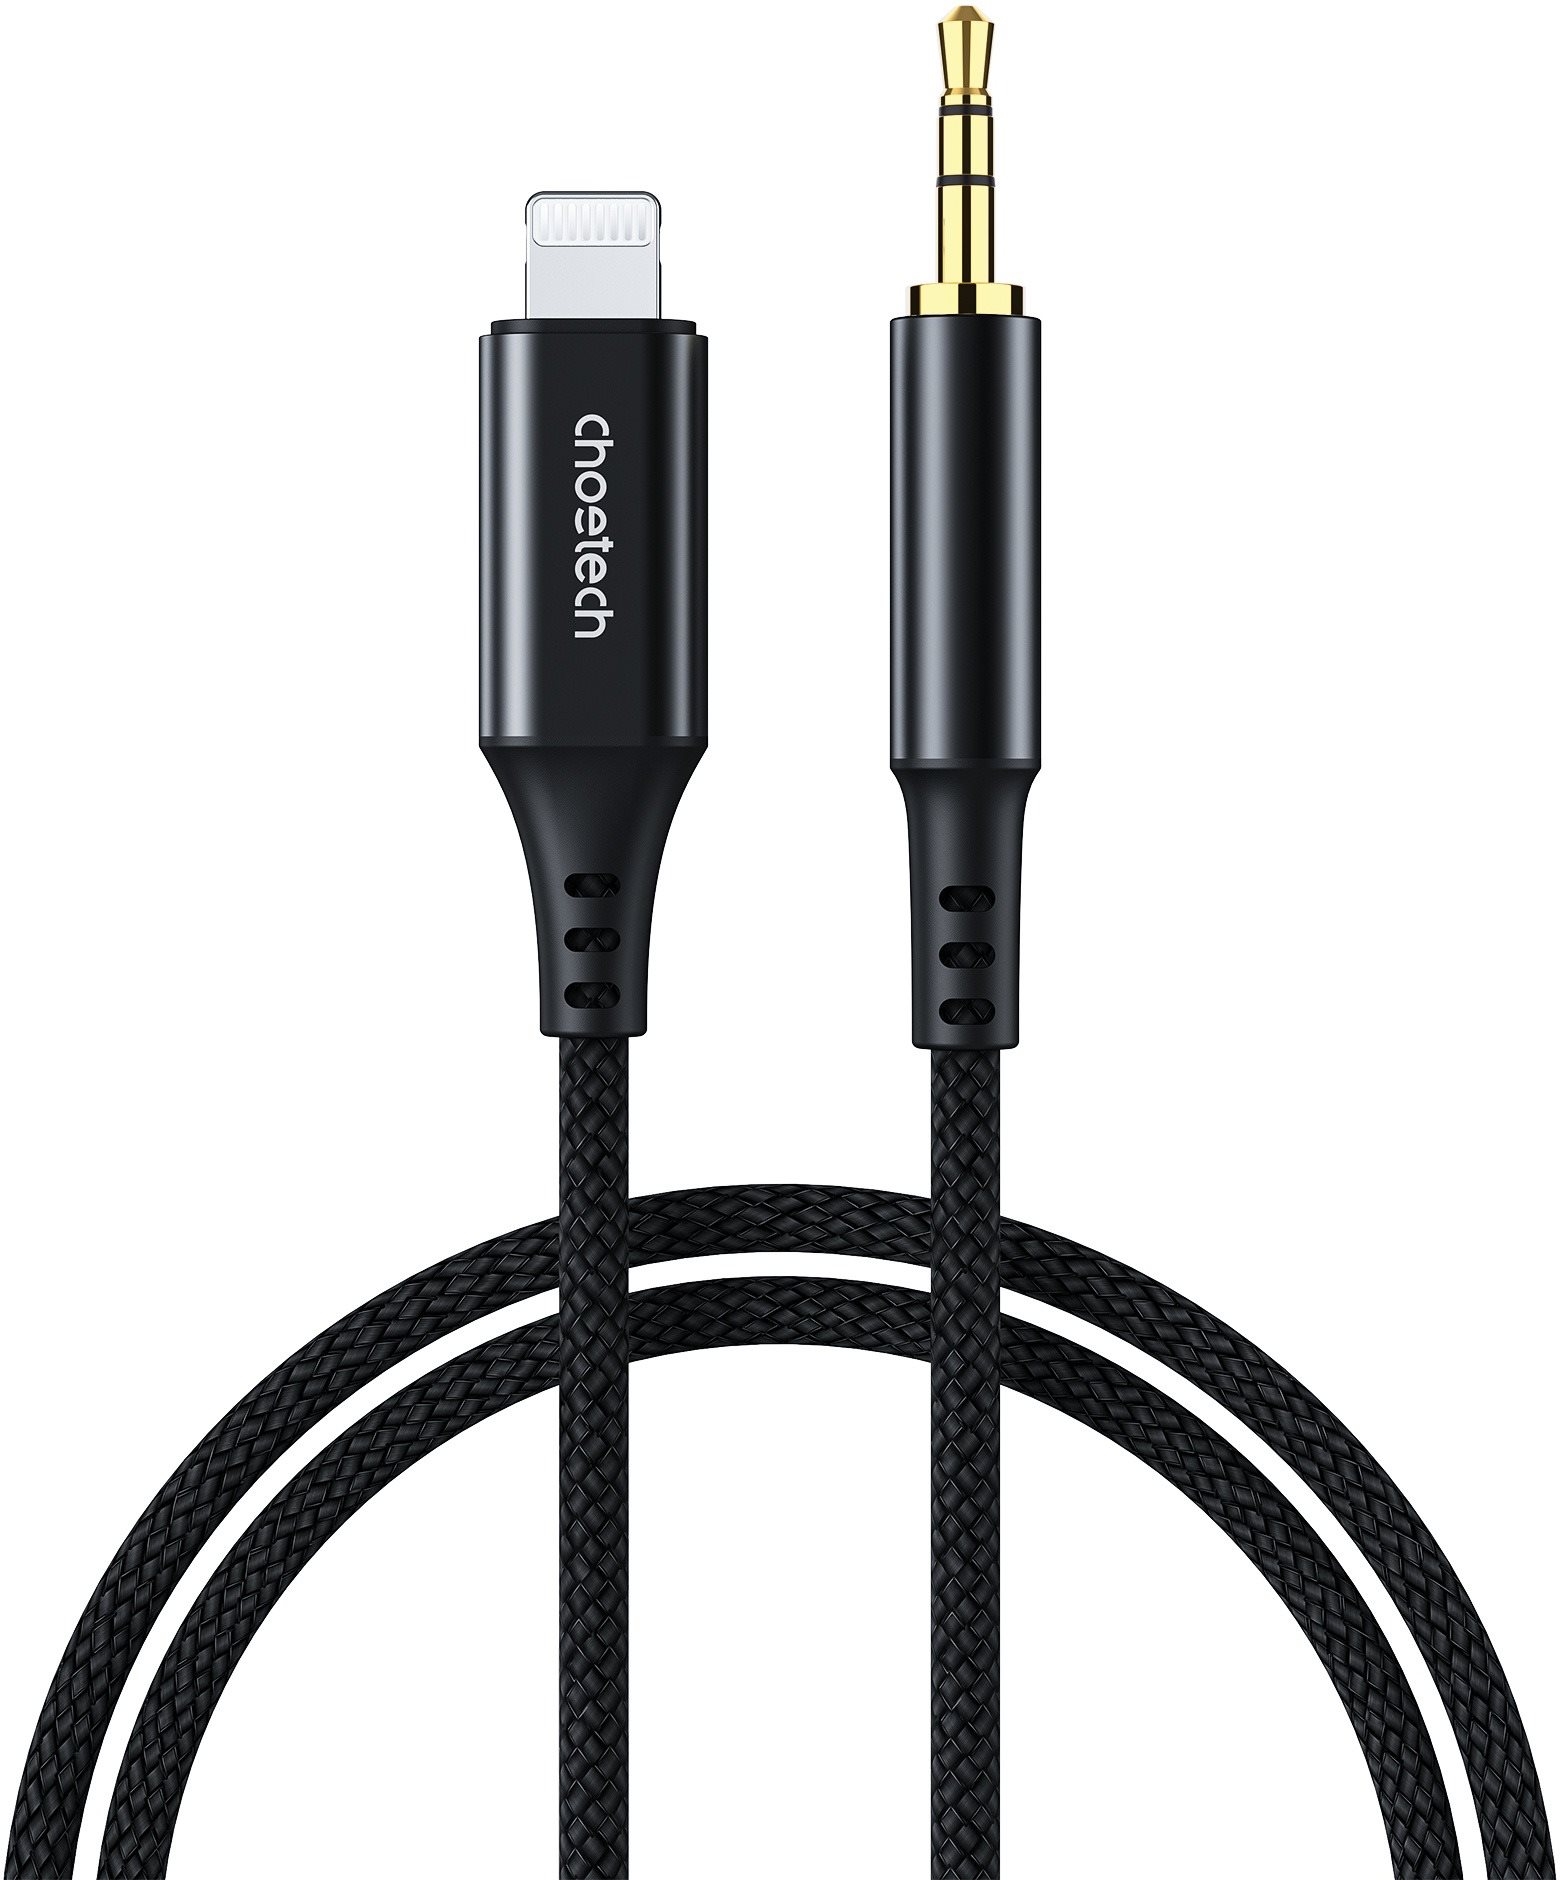 Audio kábel ChoeTech Lightning to 3.5mm 2m dc Audio cable